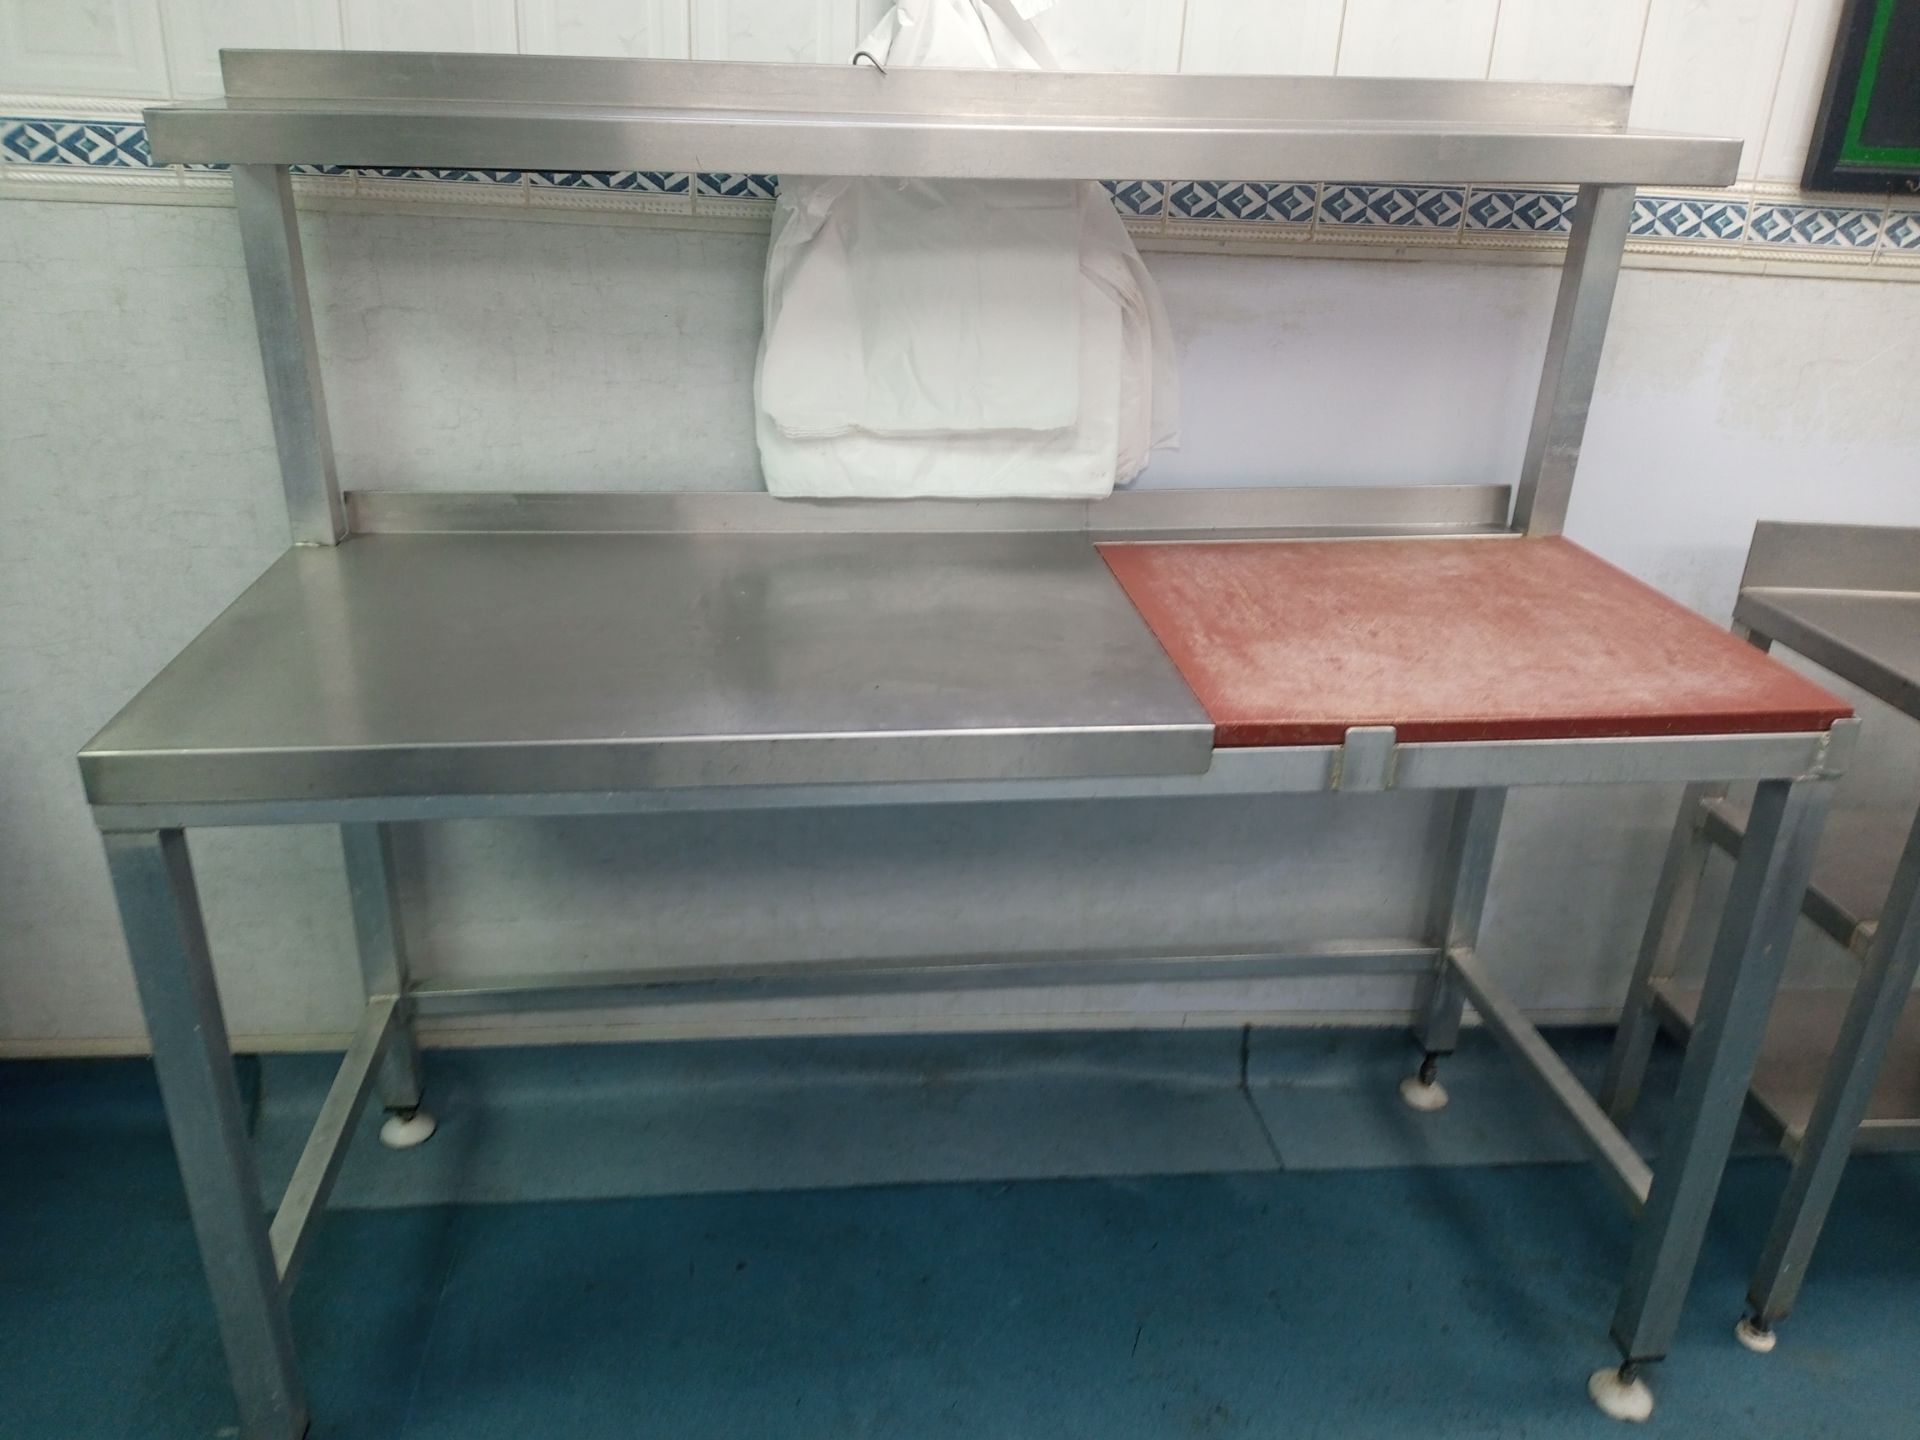 Steel Worktop with Chopping Board & Top Storage Shelf Incorporated